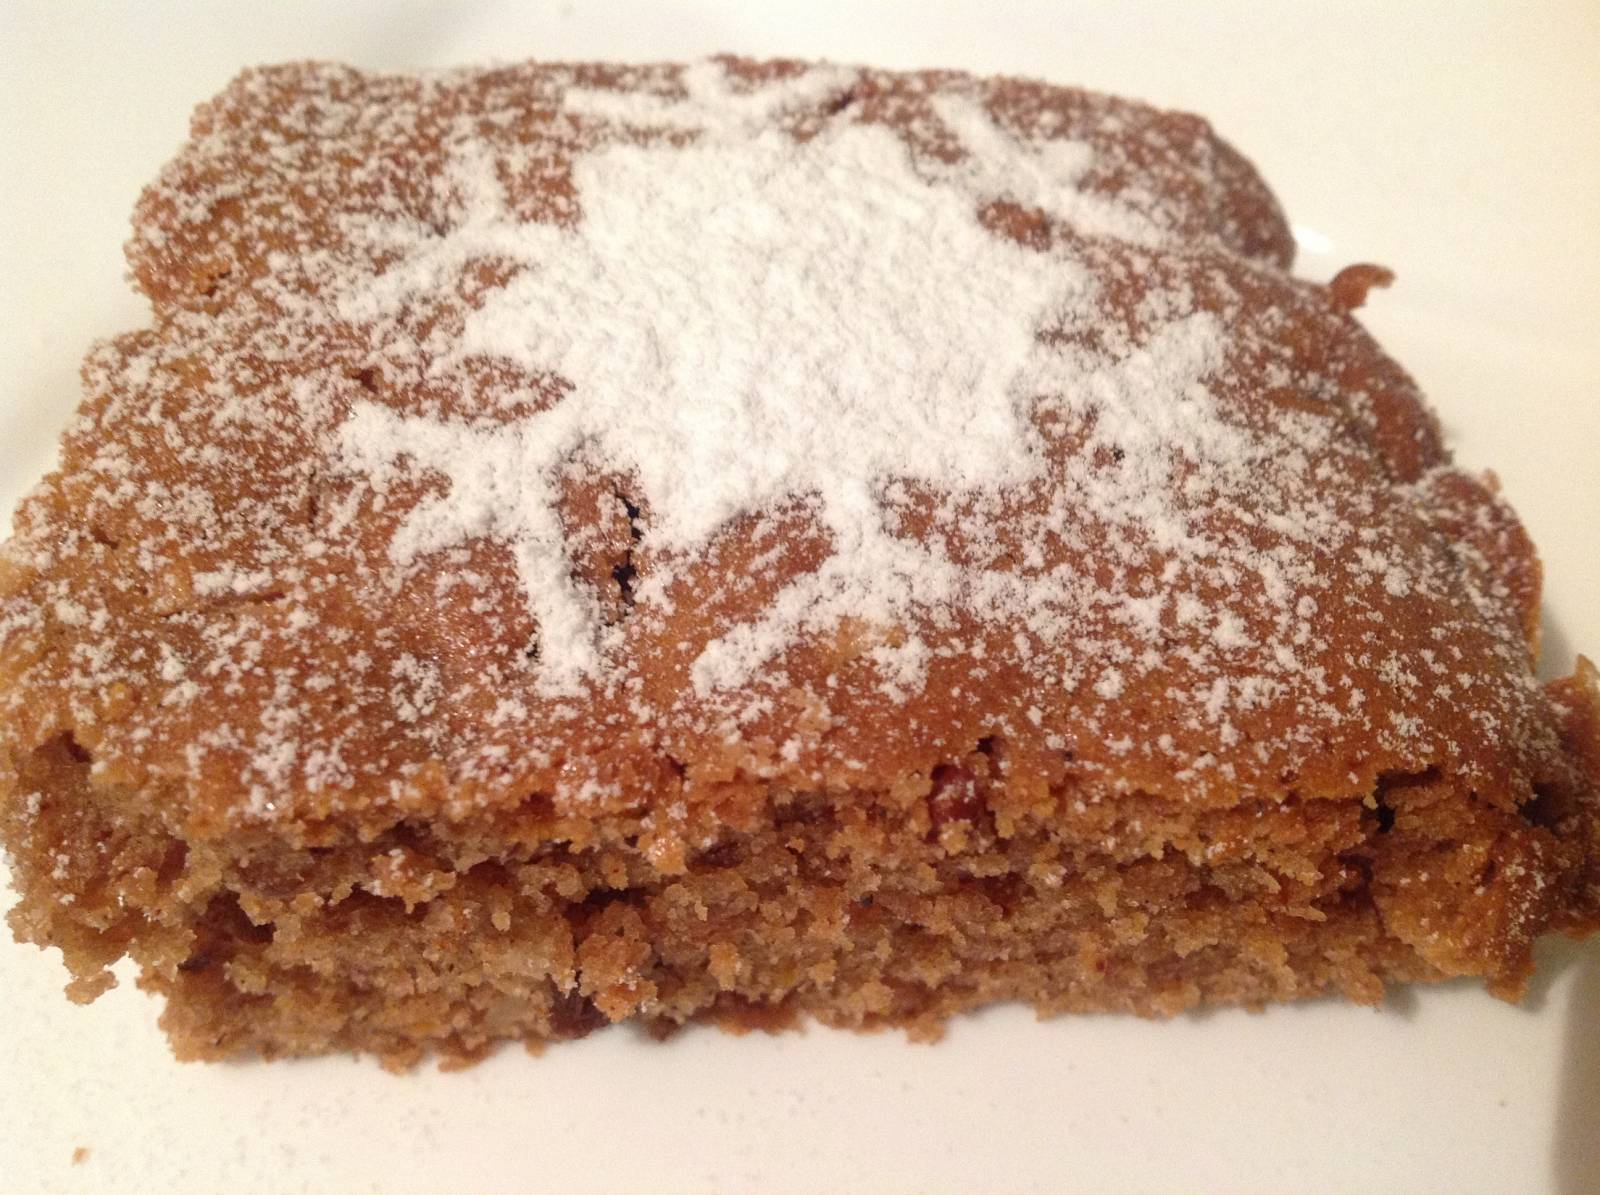 Spicy honey gingerbread with nuts